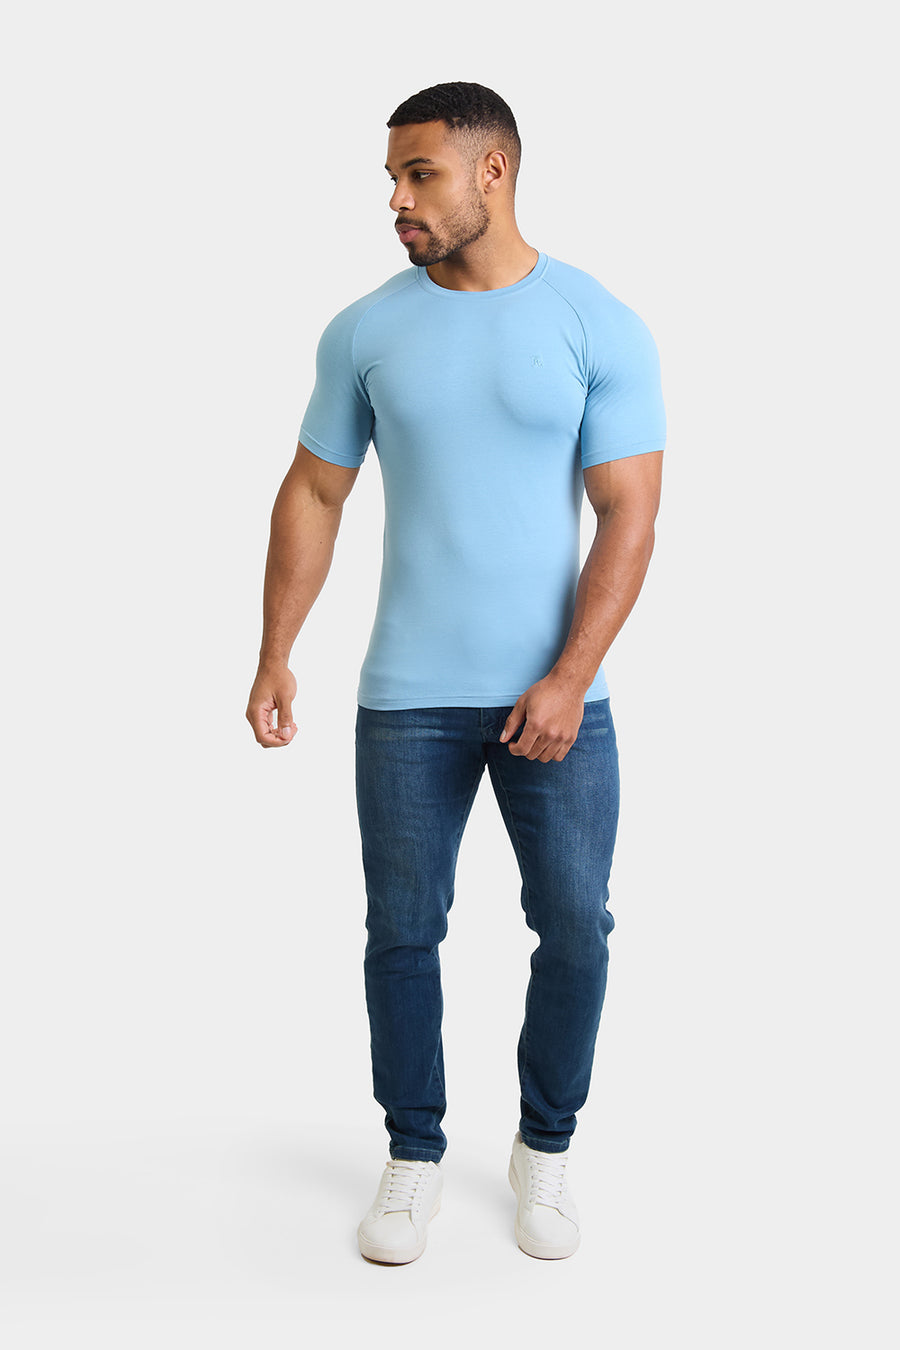 Athletic Fit T-Shirt in Mist Blue - TAILORED ATHLETE - USA